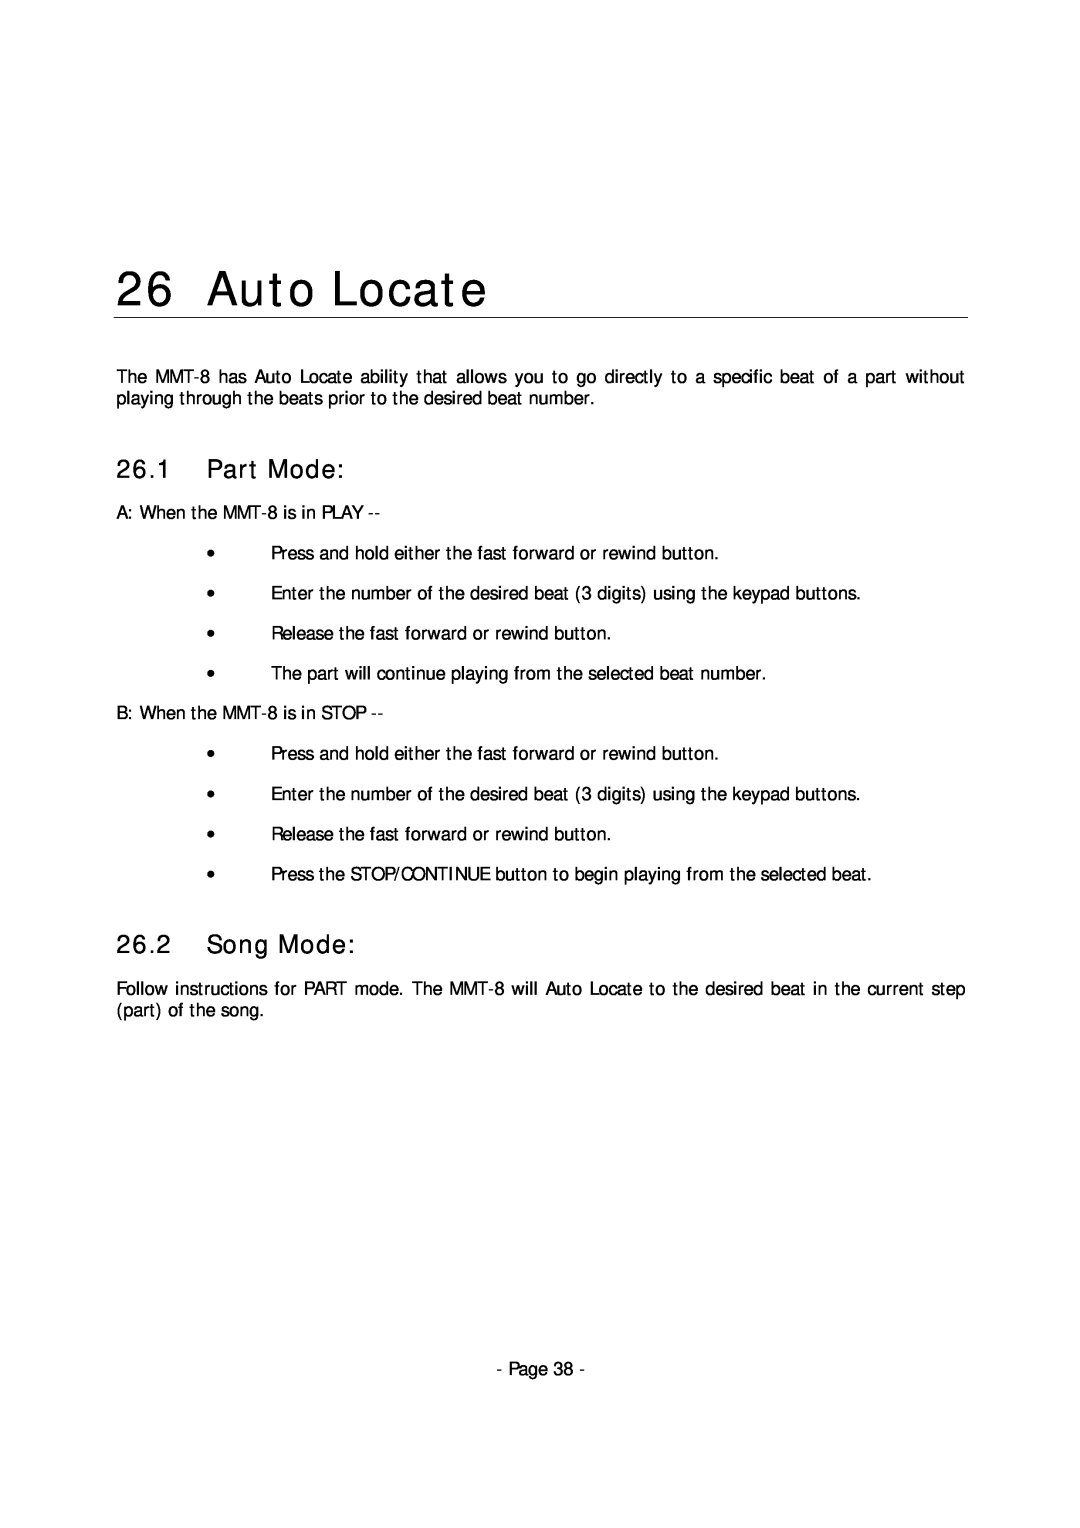 Alesis MMT-8 manual Auto Locate, 26.1Part Mode, 26.2Song Mode 